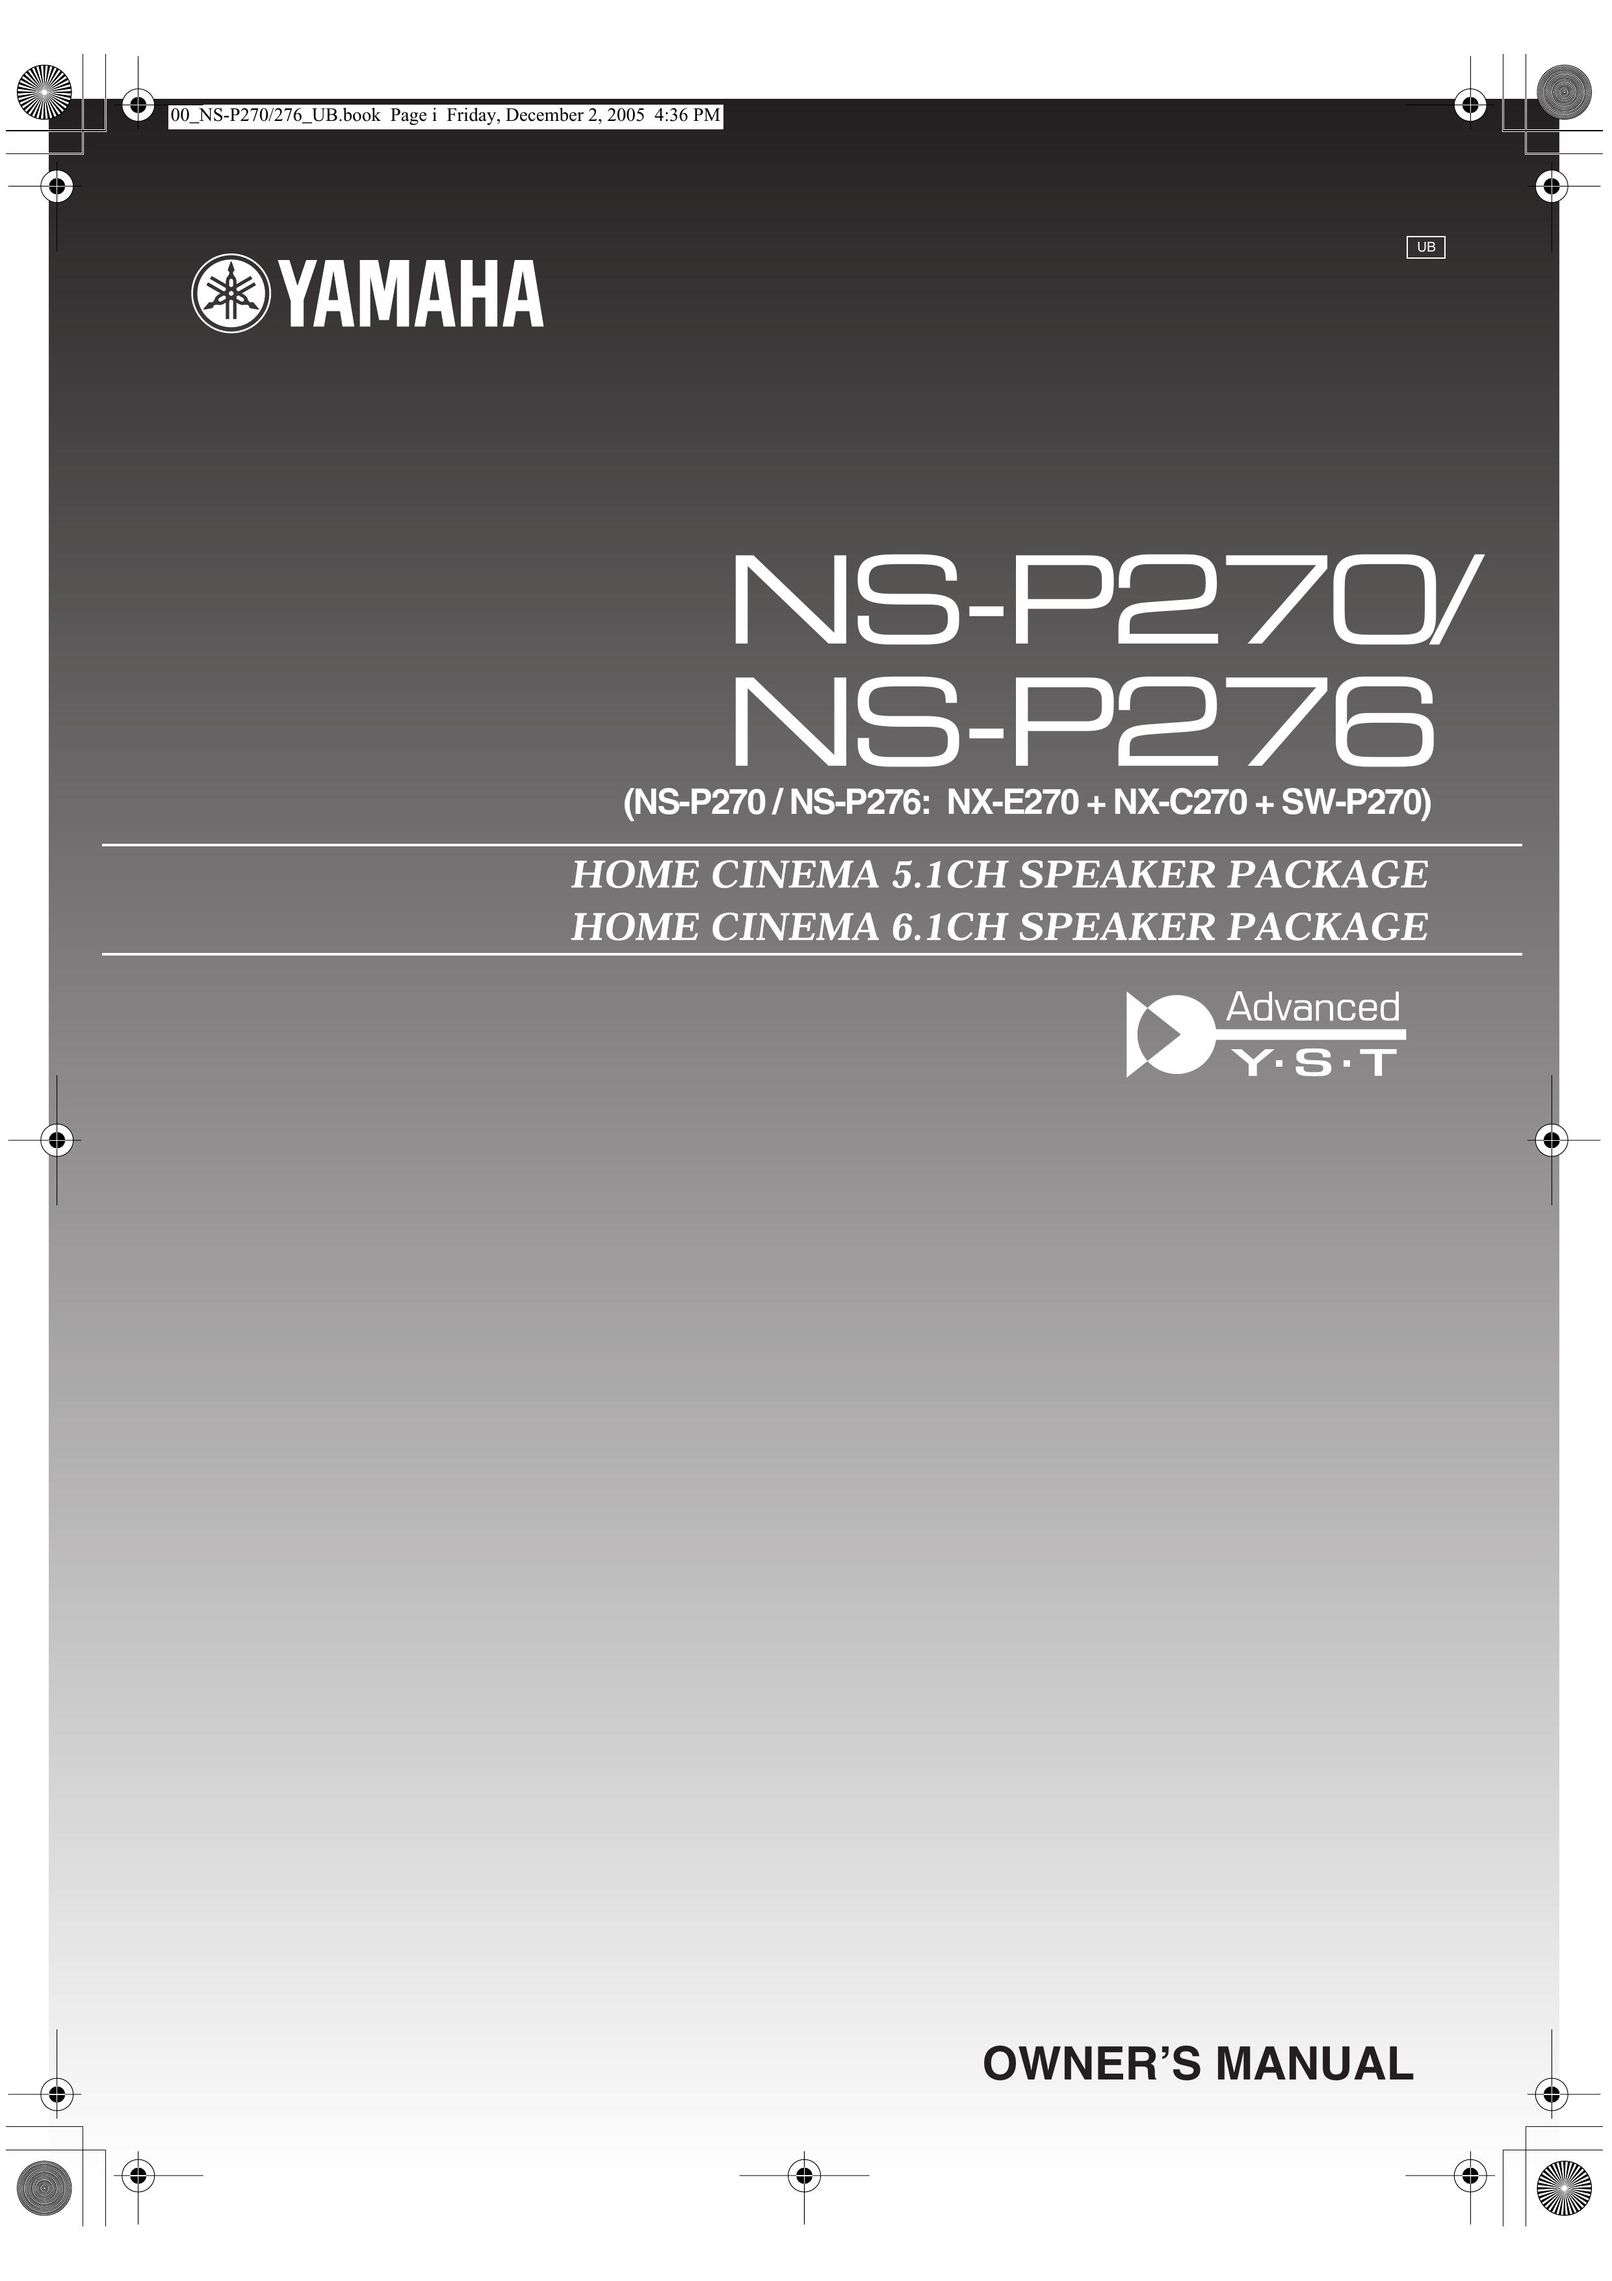 Yamaha NS-P276 Home Theater System User Manual